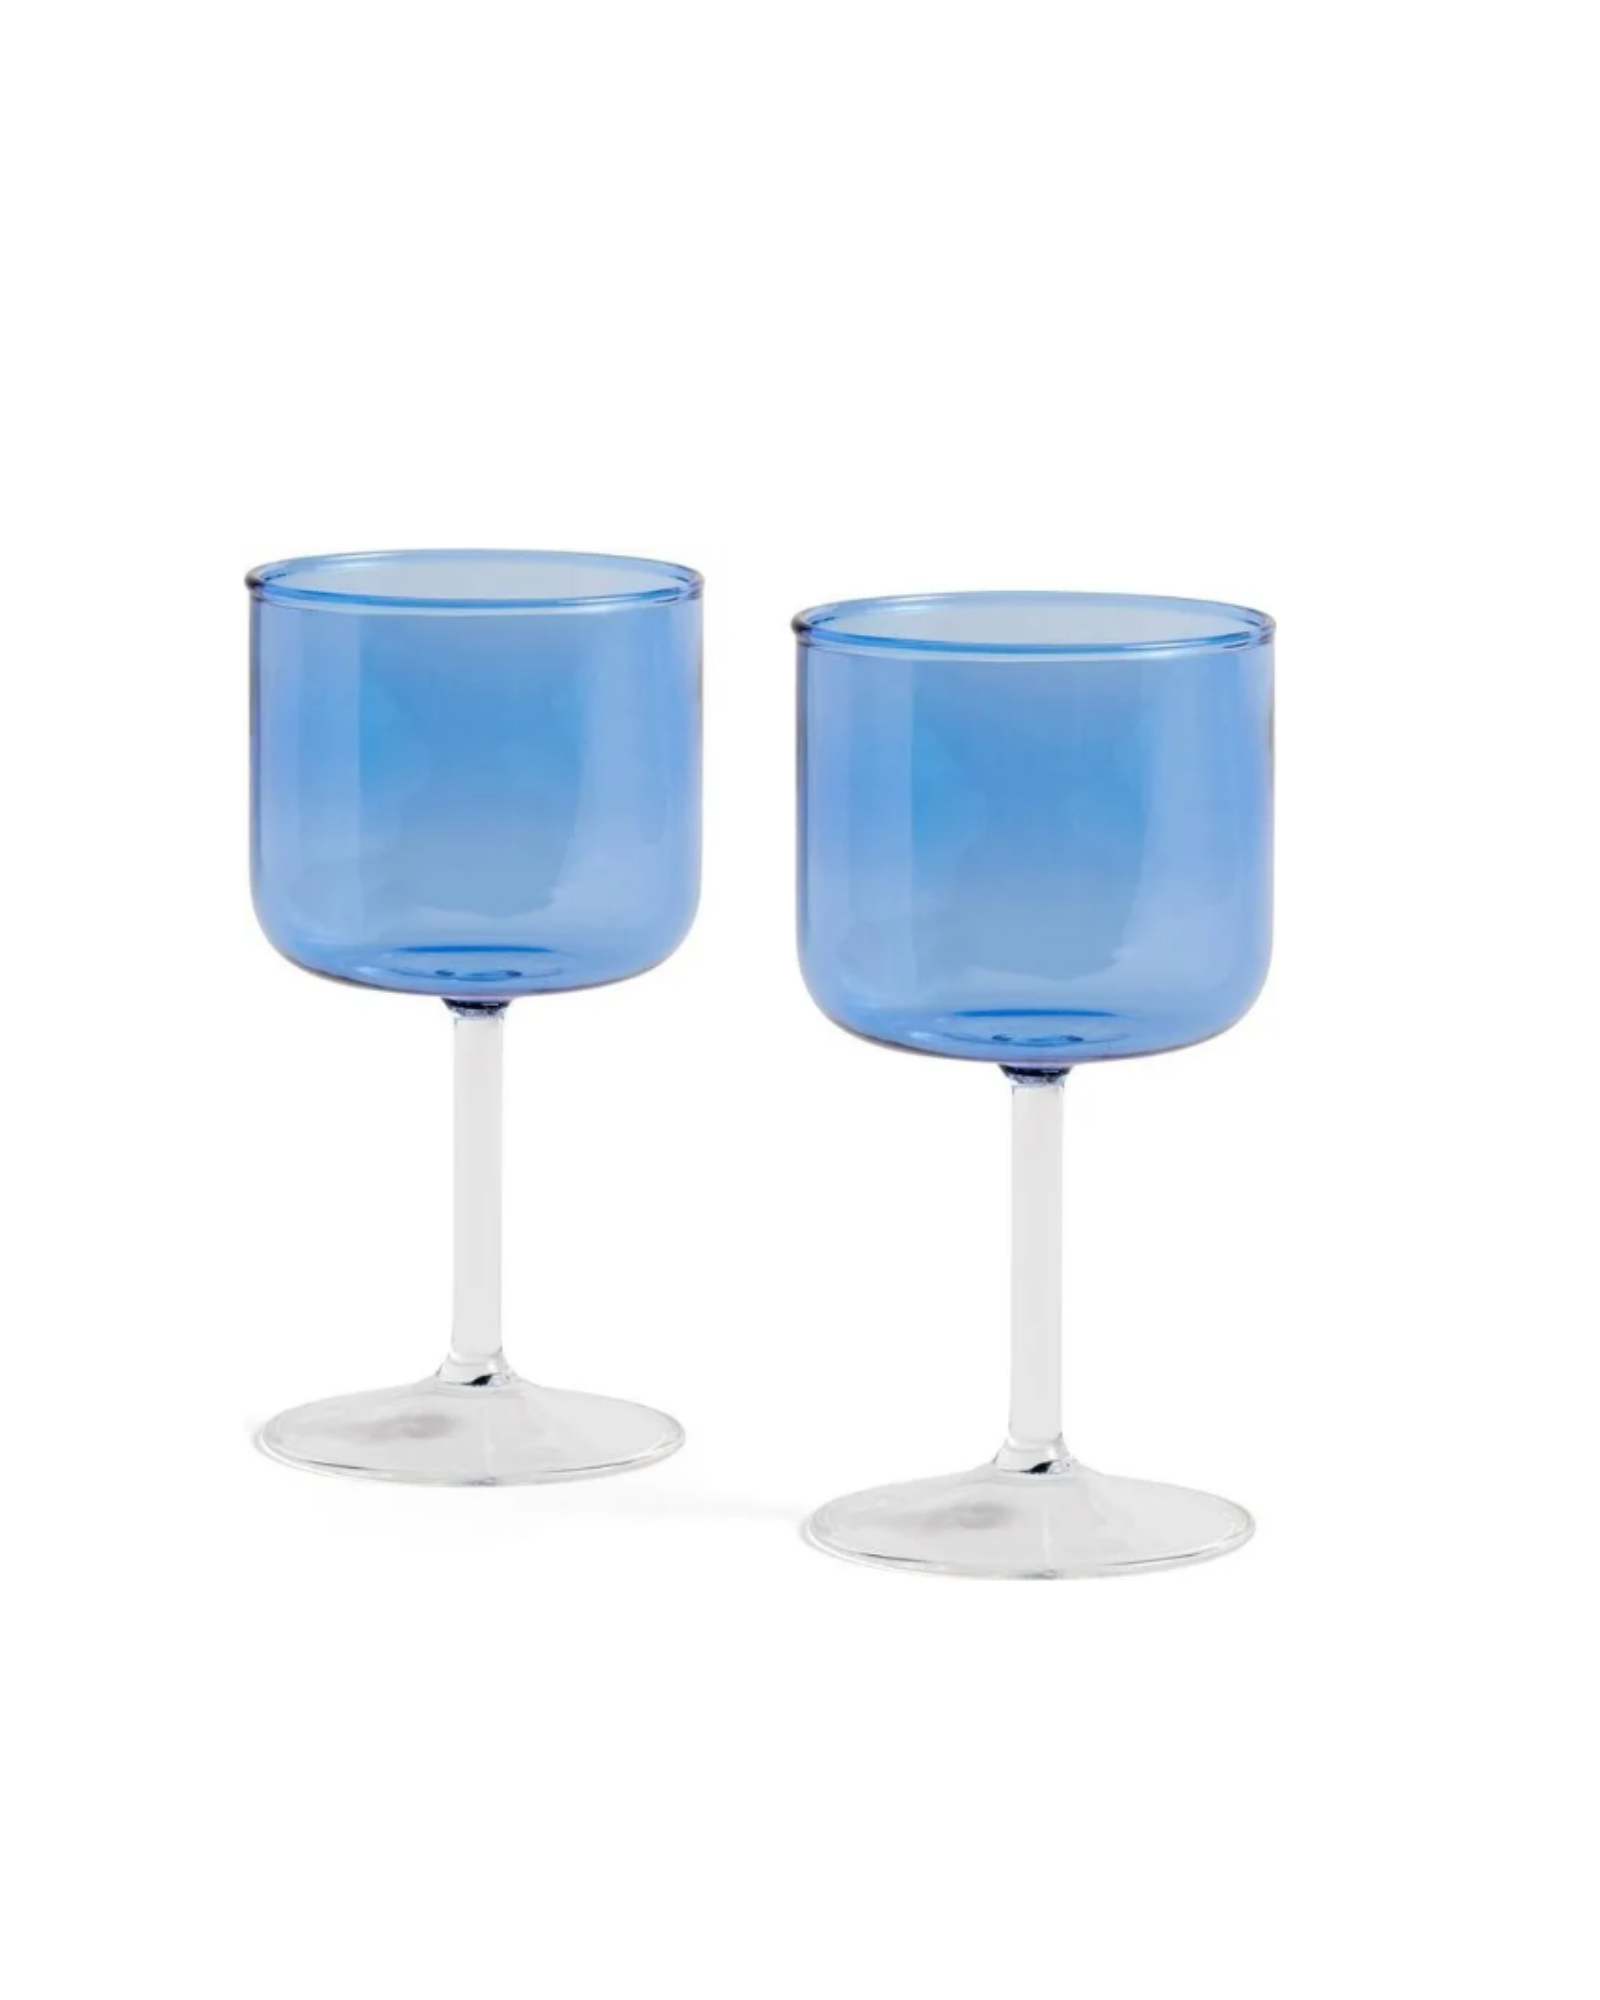  TINT WINE GLASS - BLUE AND WHITE 